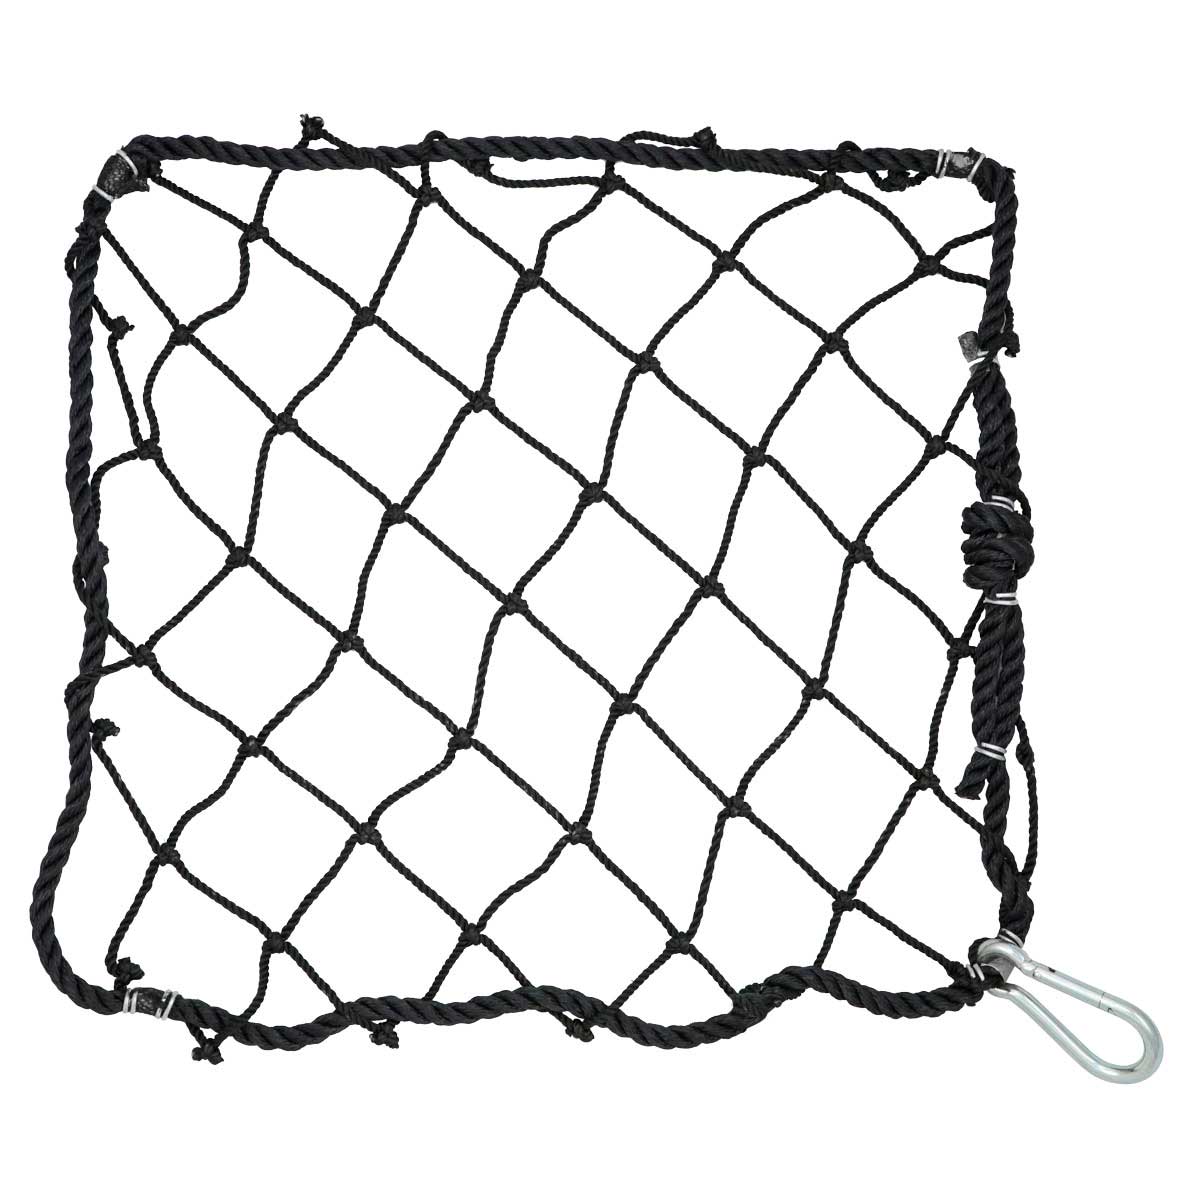 Personnel Safety Net - 17' x 17' x 24'